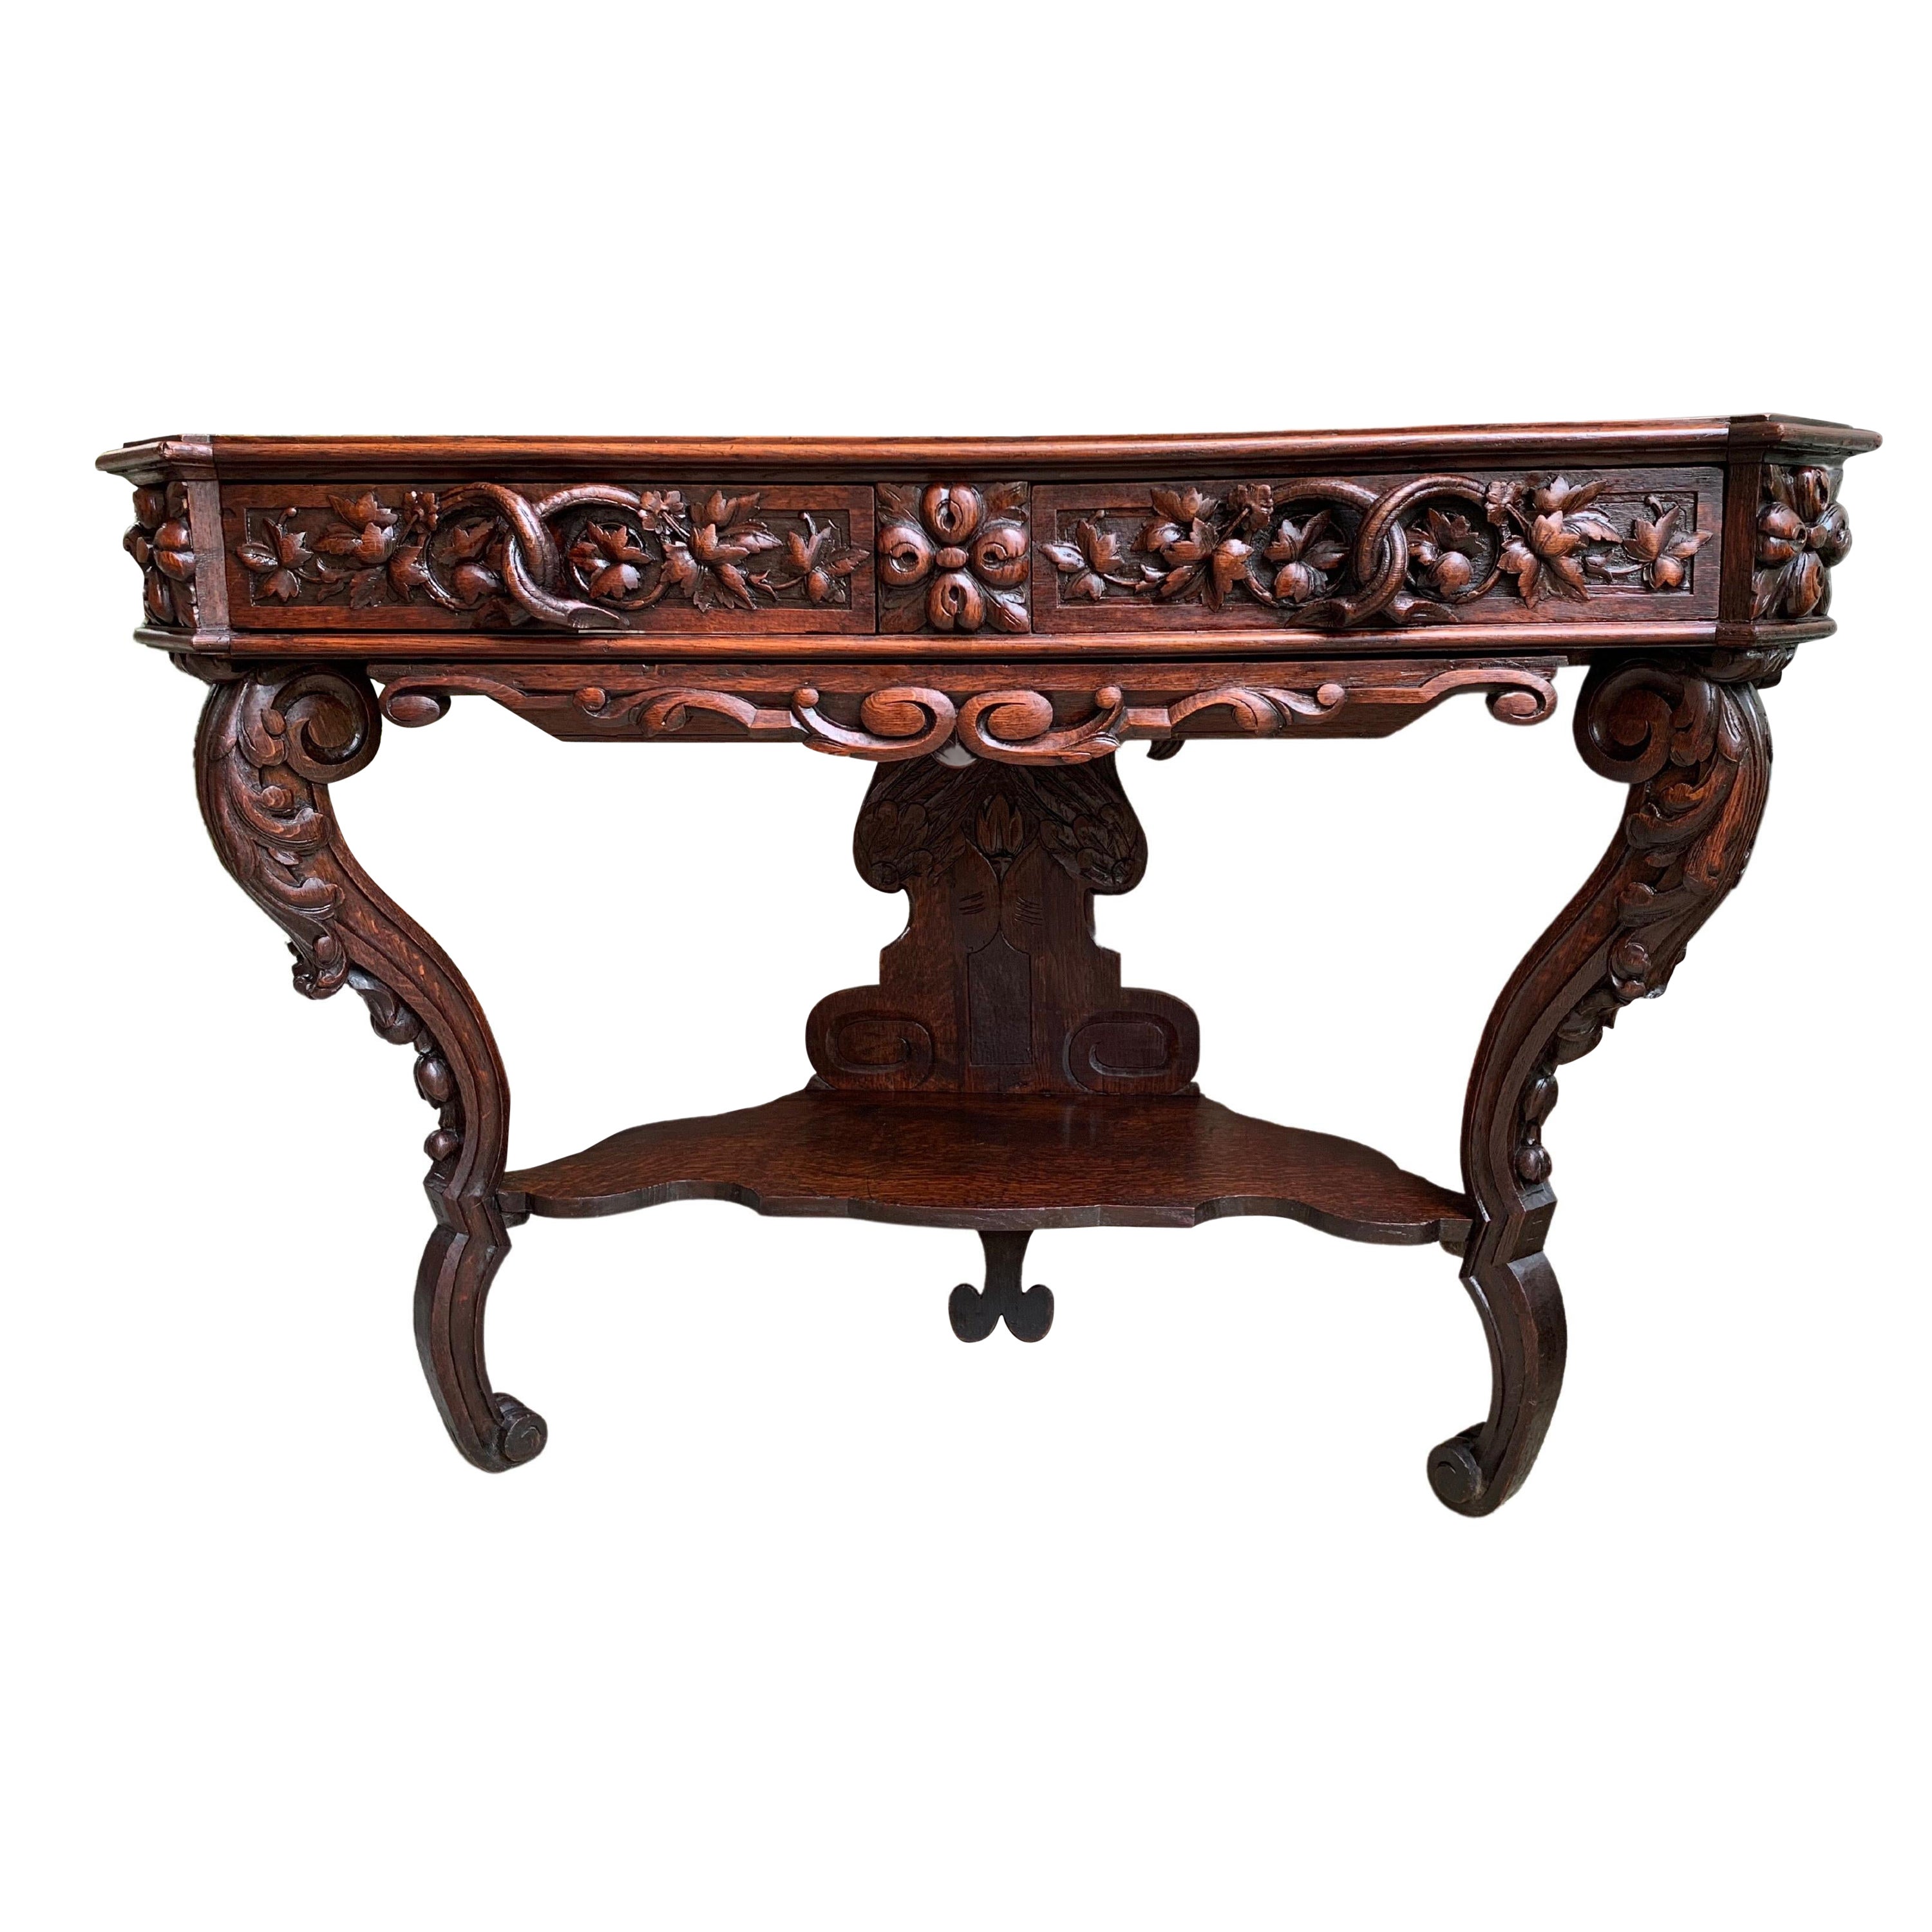 19th century French Carved Oak Console Sofa Foyer Table Sideboard Black Forest For Sale